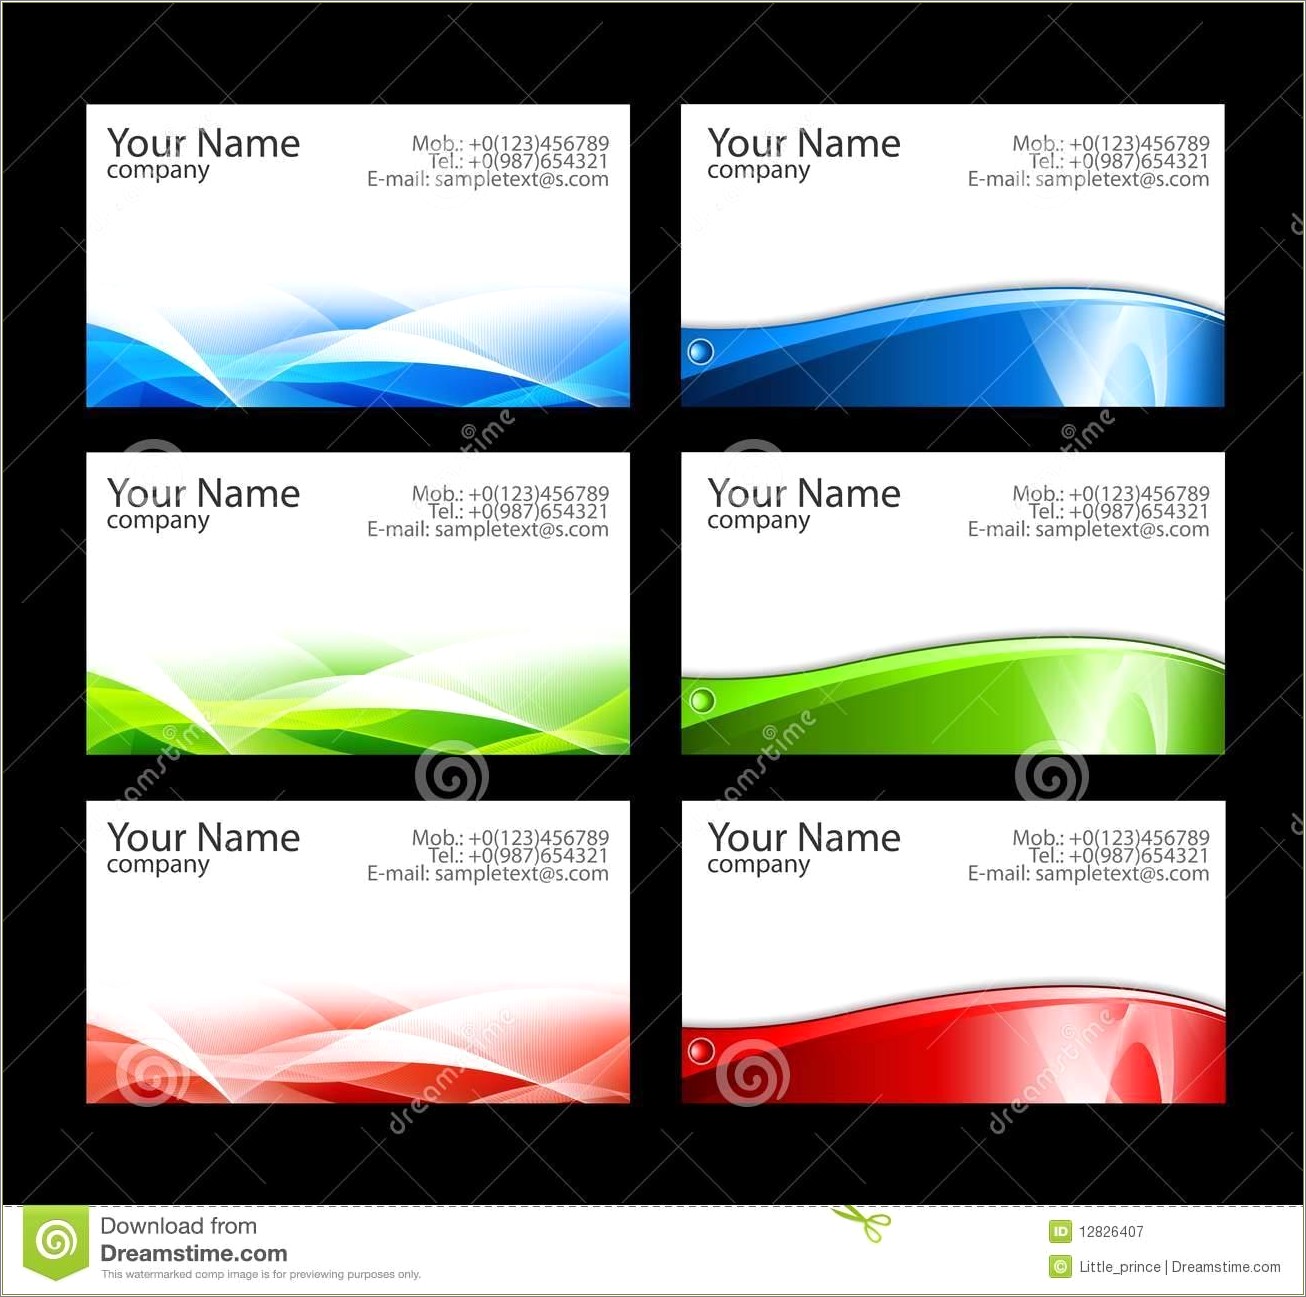 Free Business Card Templates For Microsoft Word 2010